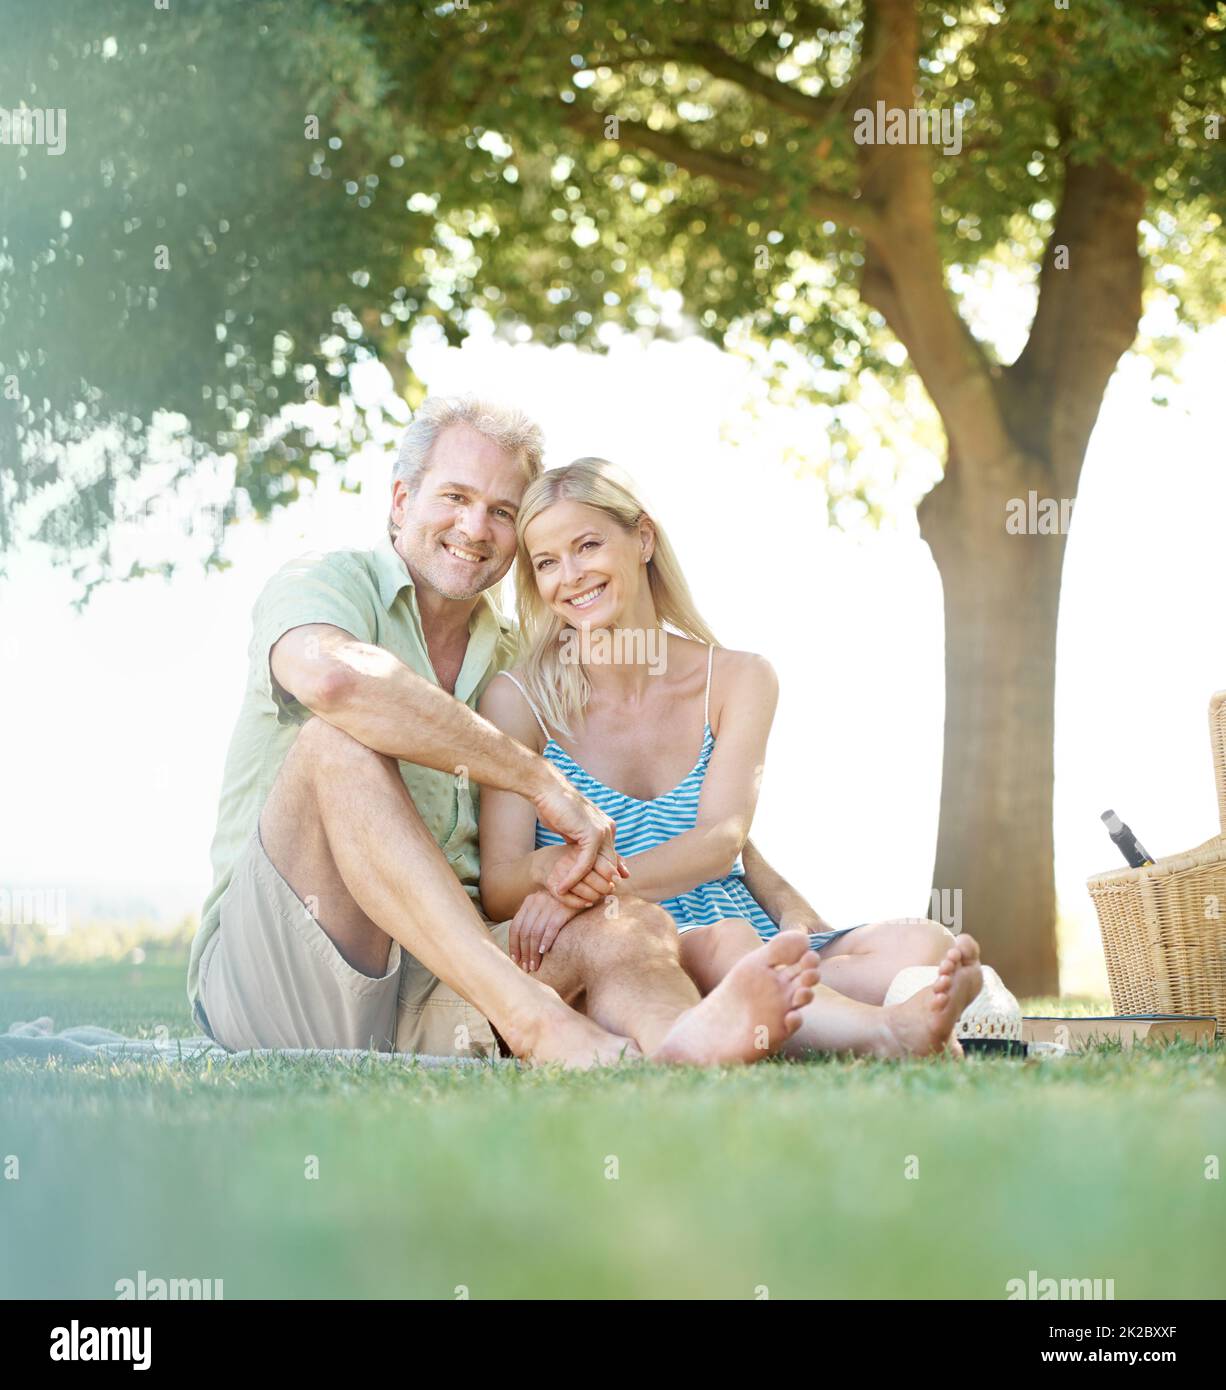 Weekend break-away. A happy husband and wife smiling at the camera as they sit in a park having a picnic. Stock Photo